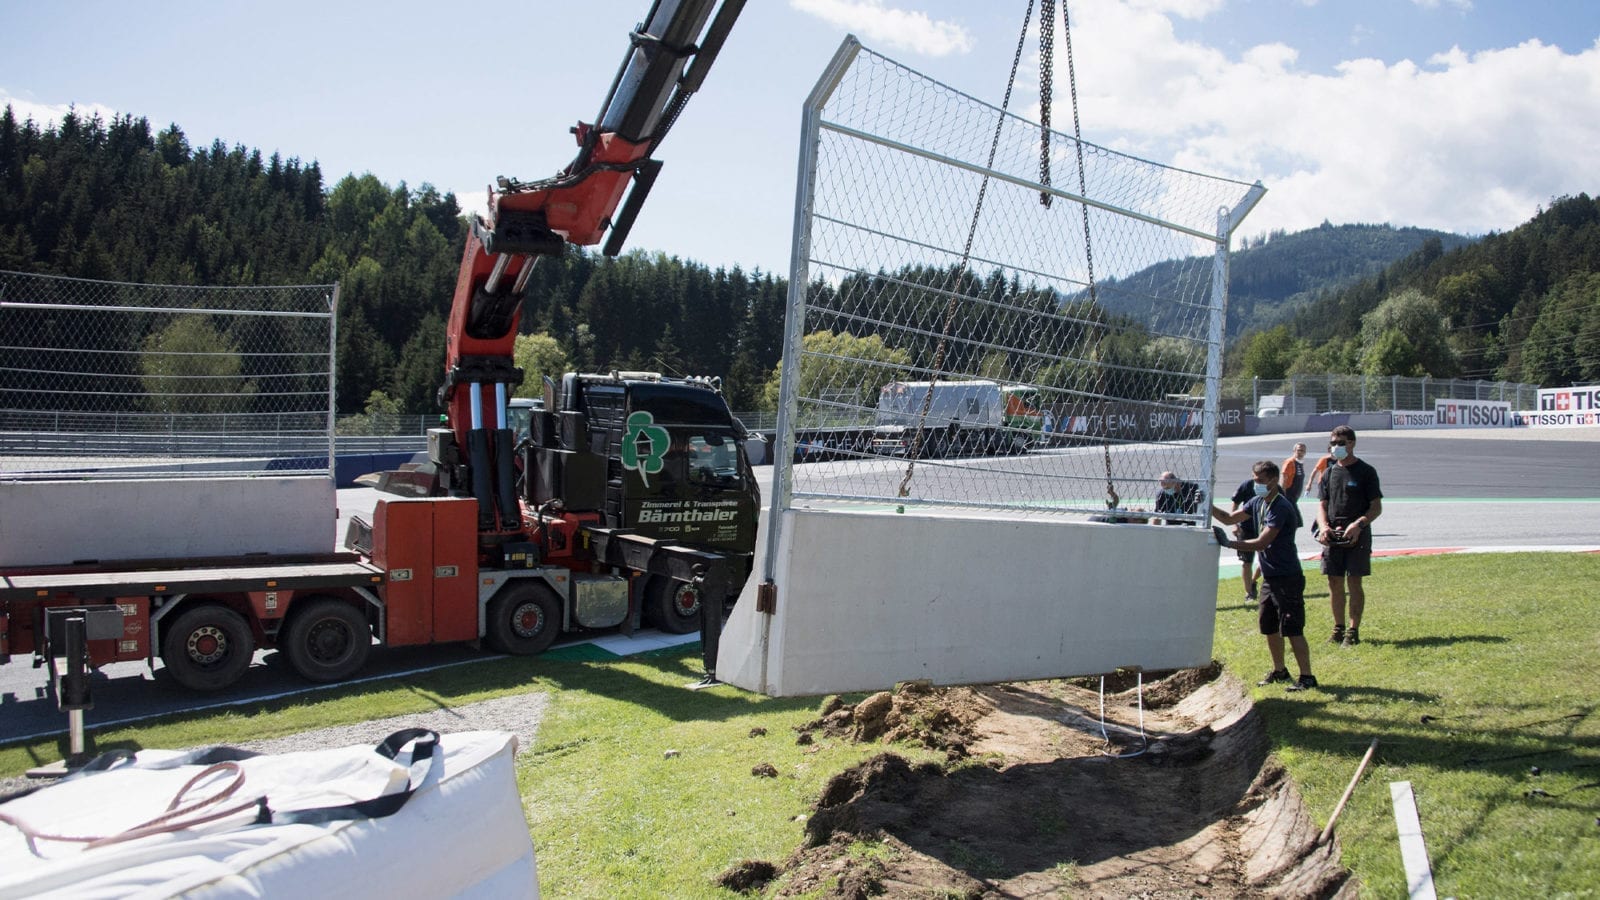 New safety wall being installed at the Red Bull Ring following the MotoGP Austrian GP crash between Franco Morbidelli and Johann Zarco